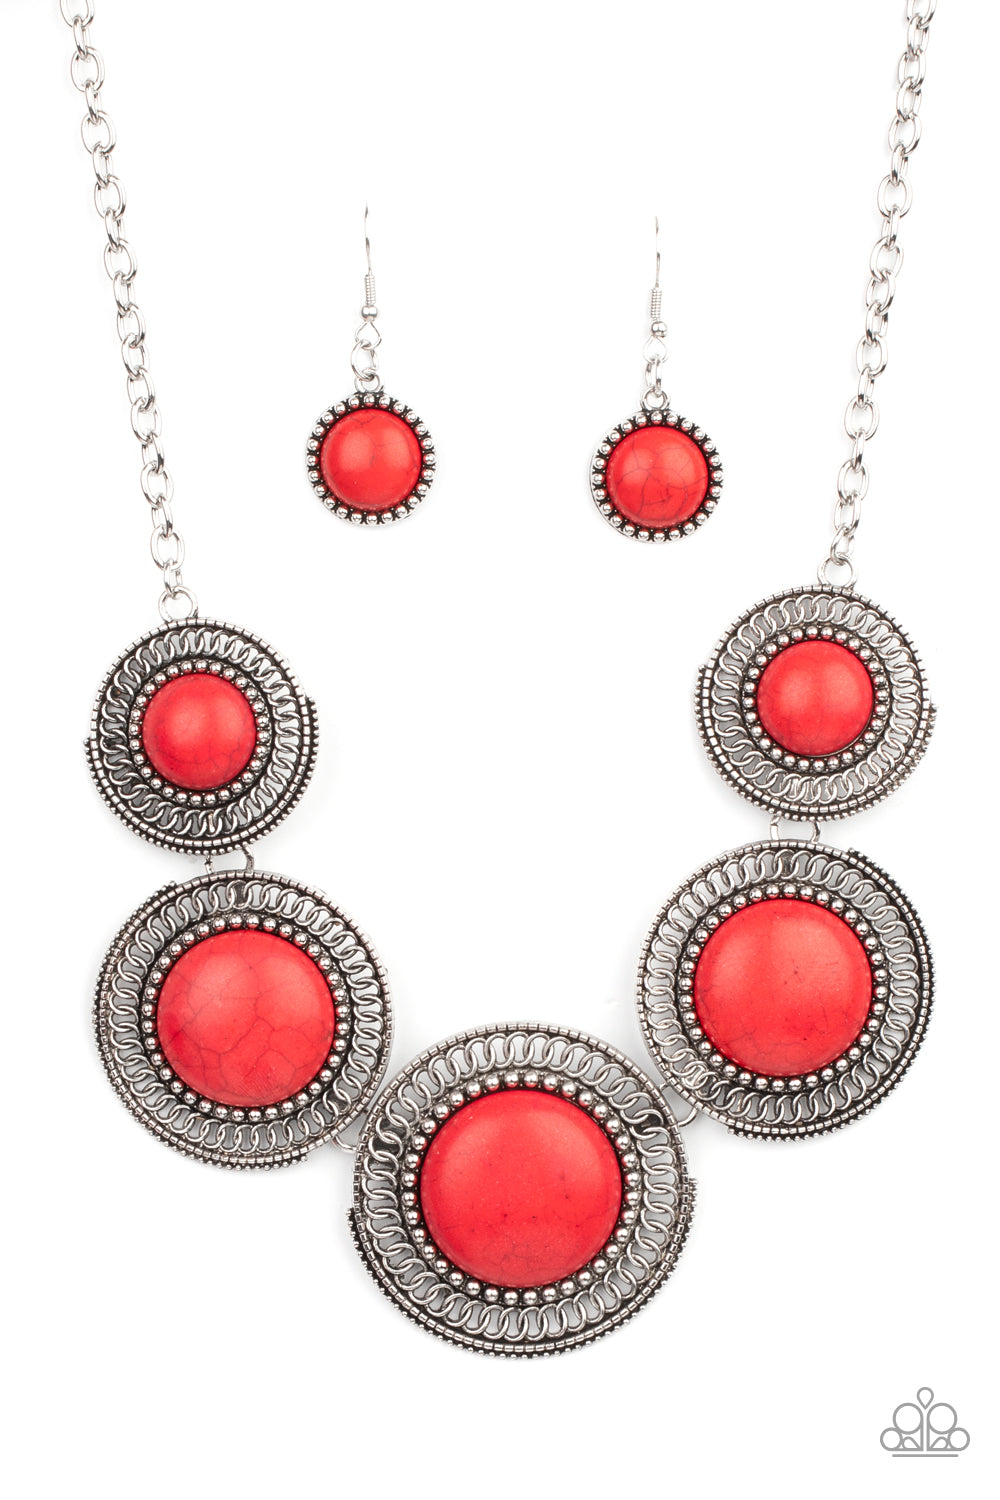 She Went West - Red Necklace - Paparazzi Accessories - Paparazzi Accessories 